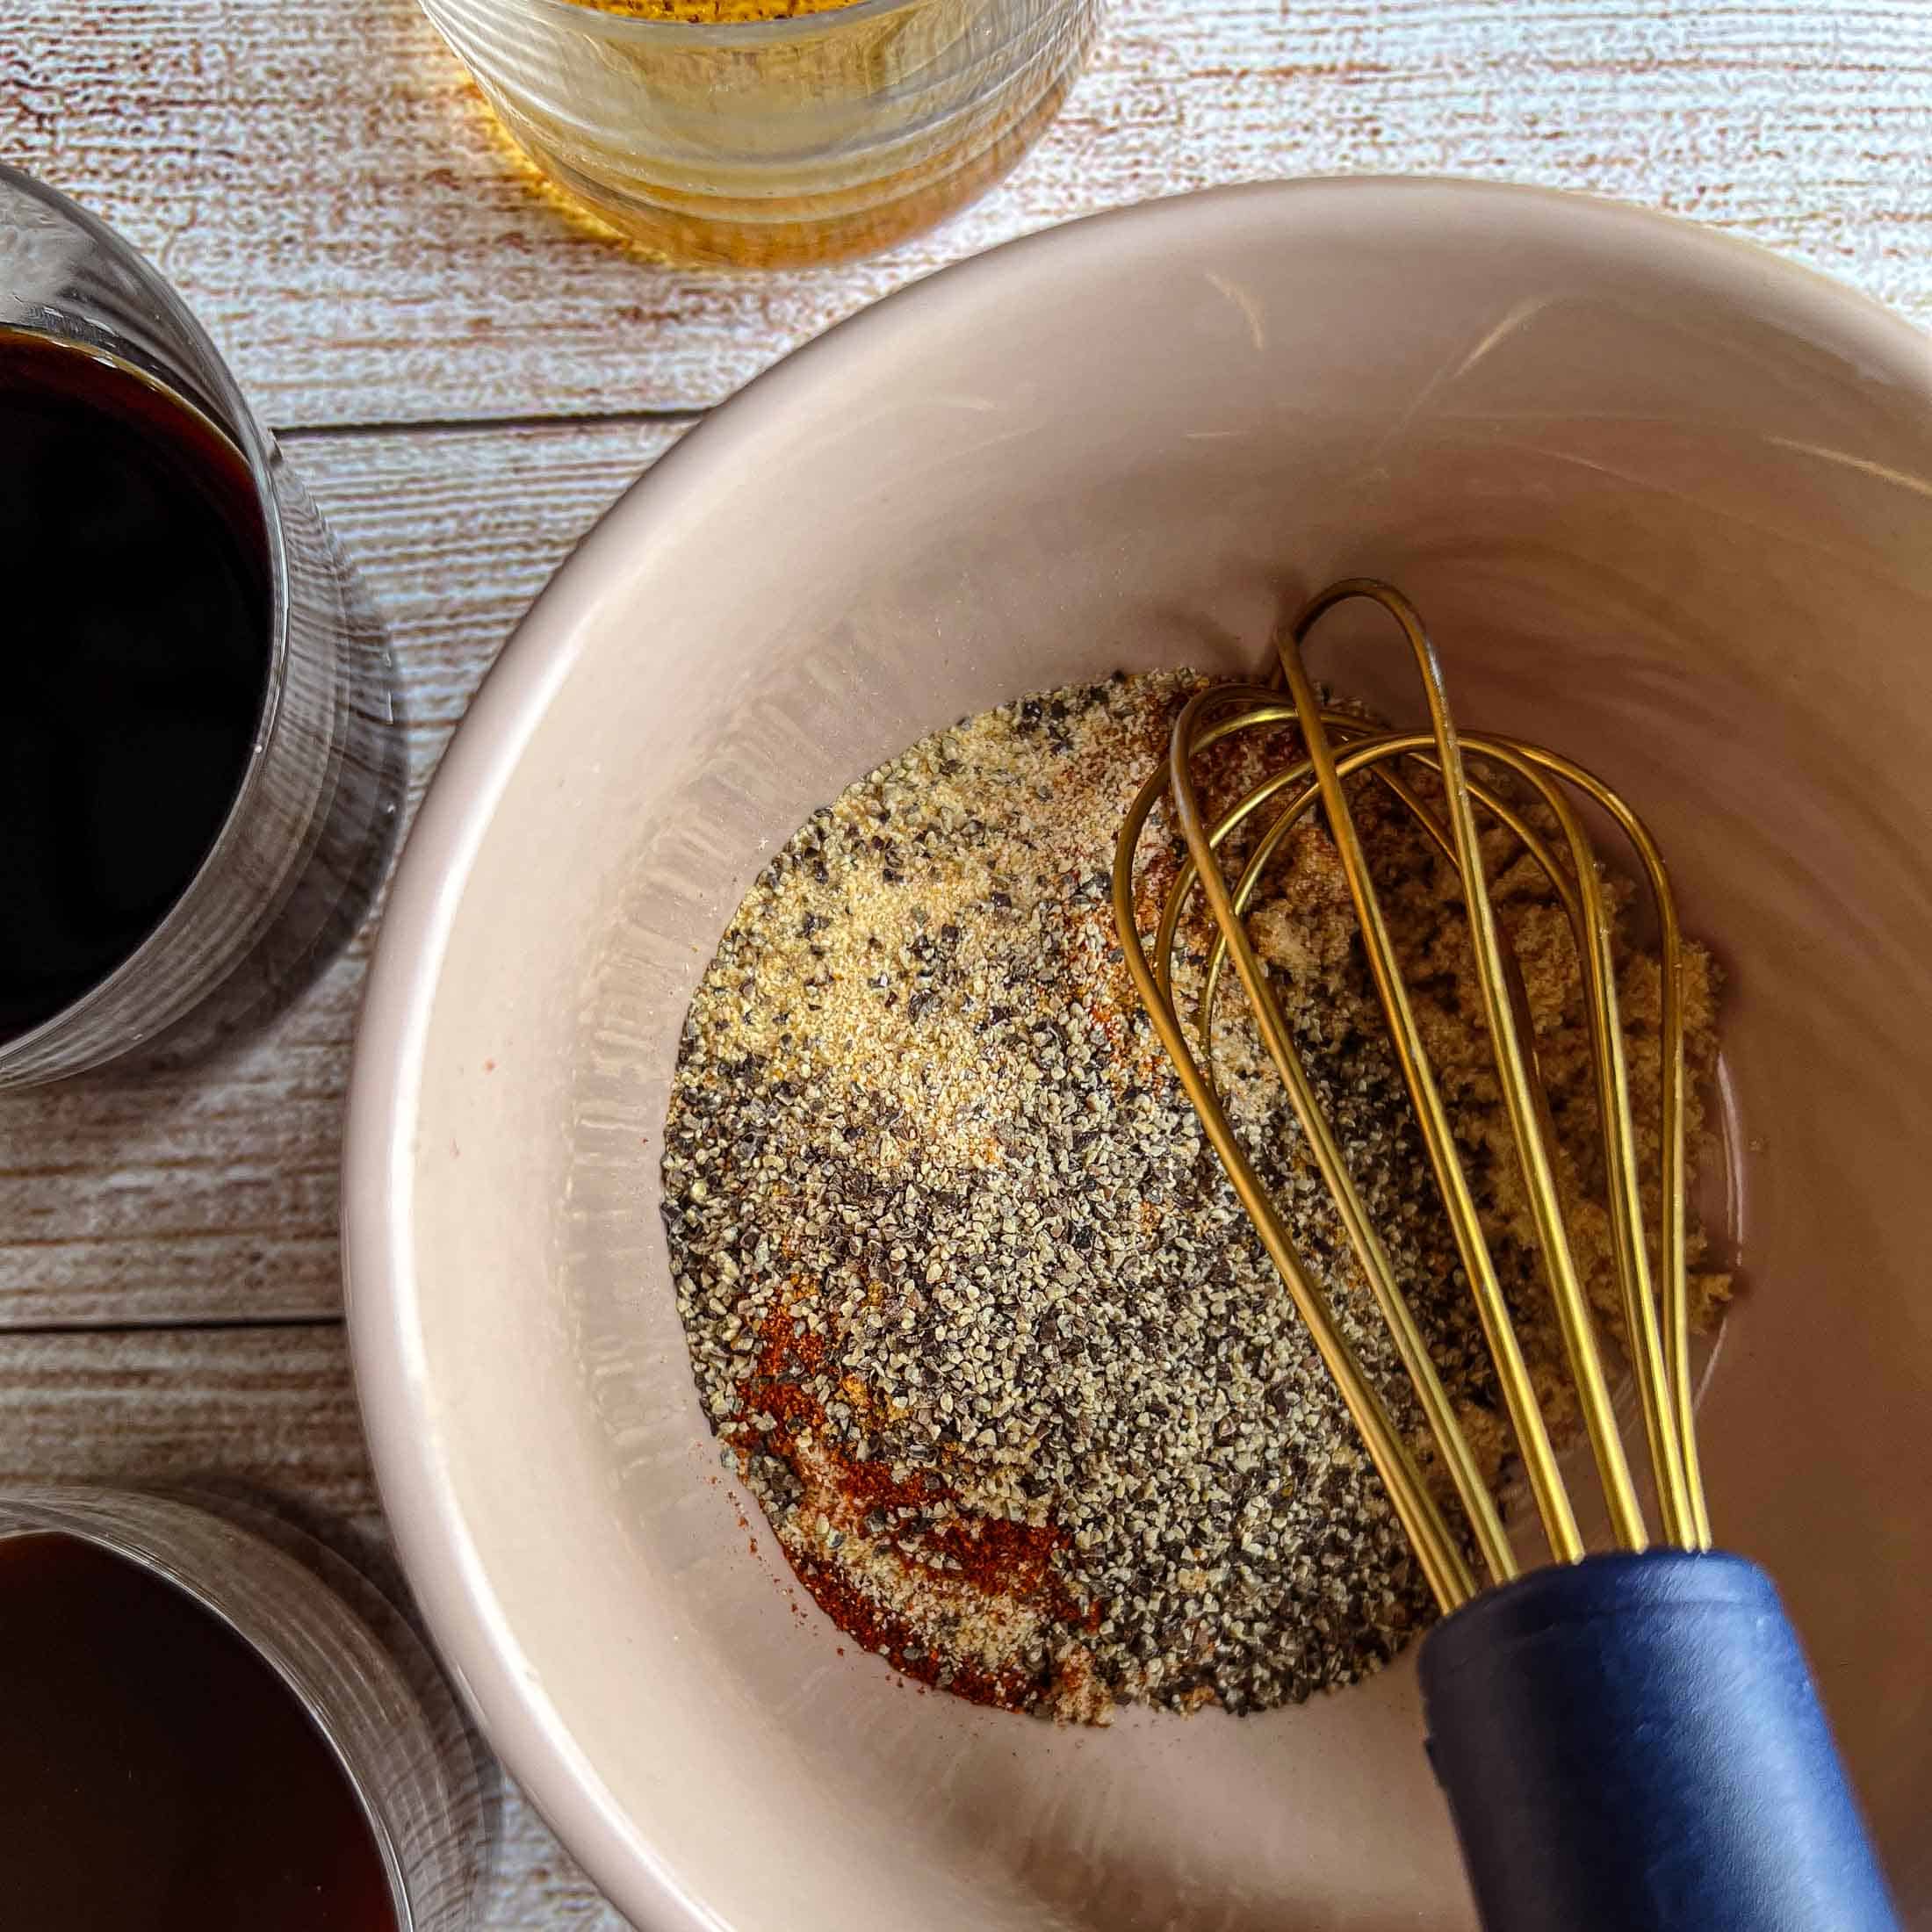 A golden whisk mixing dry ingredients in a small bowl.